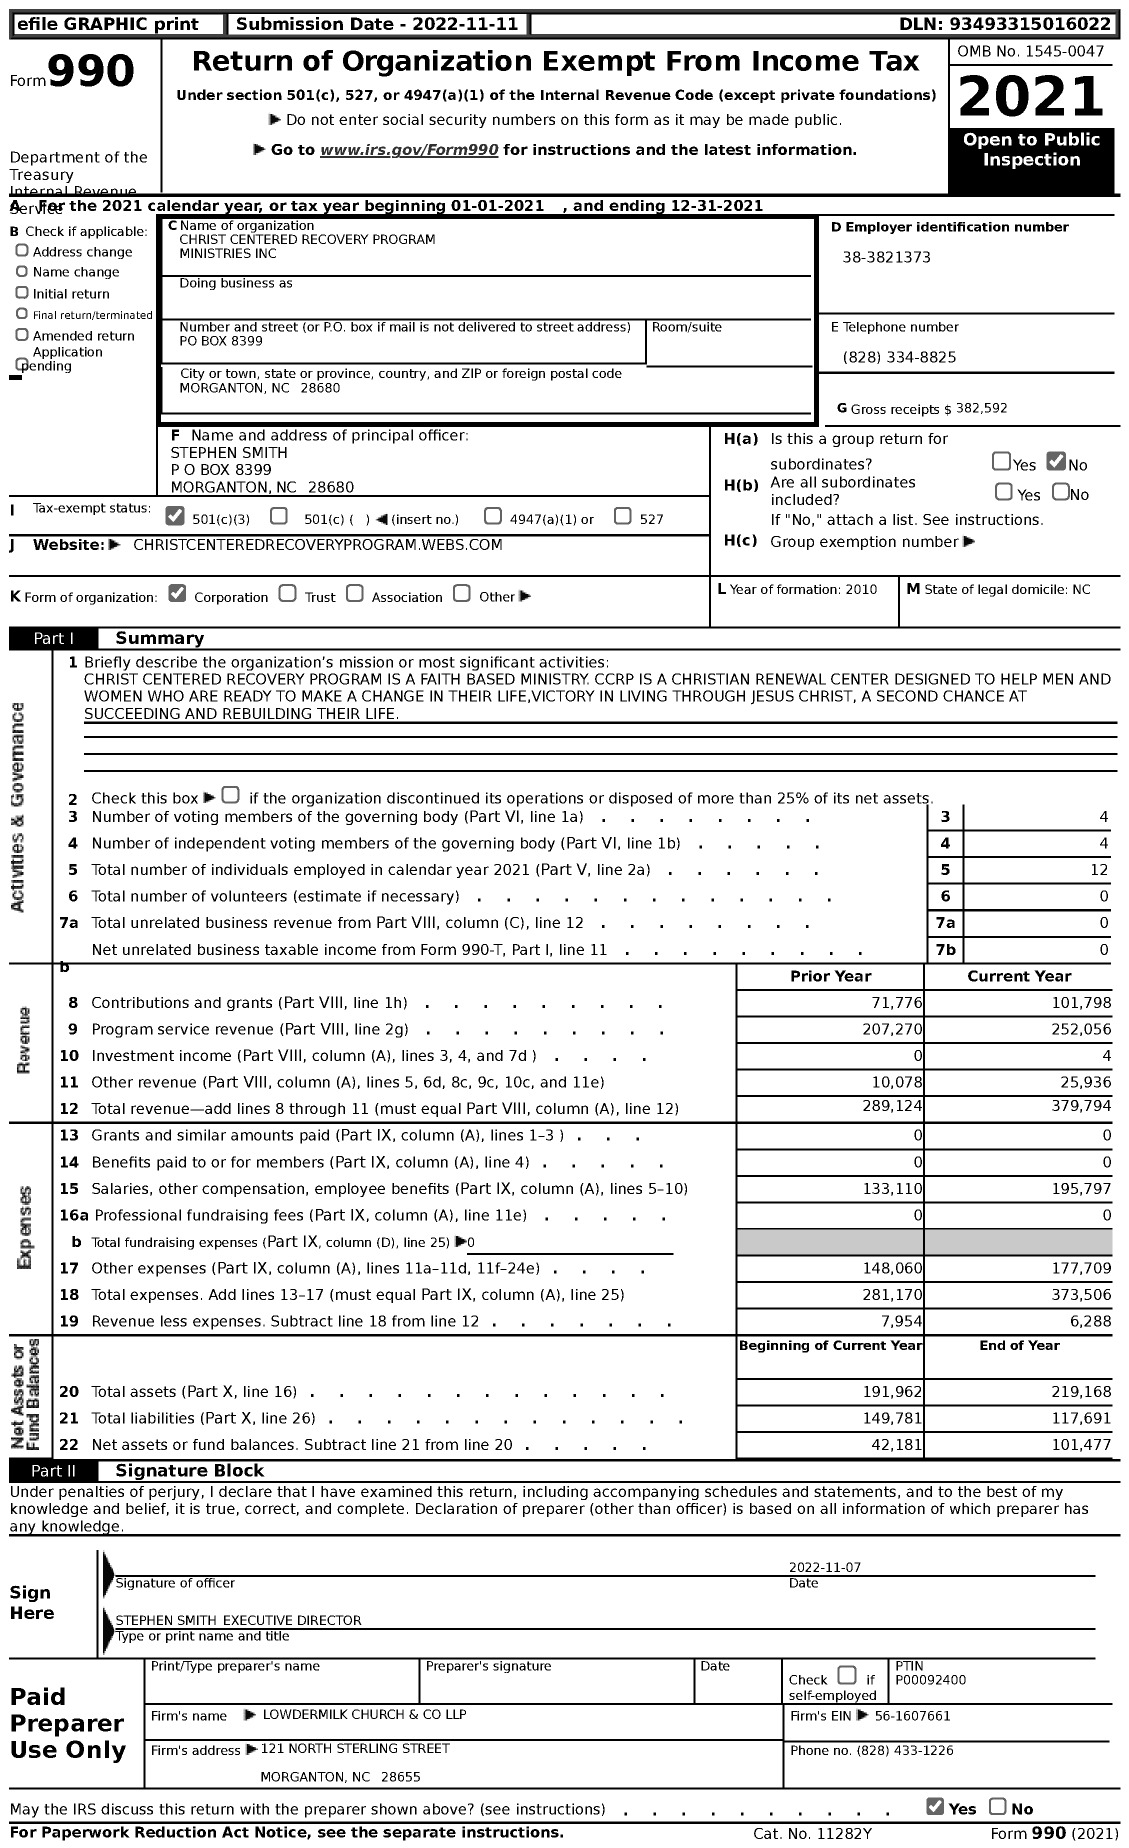 Image of first page of 2021 Form 990 for Christ Centered Recovery Program Ministries (CCRP)